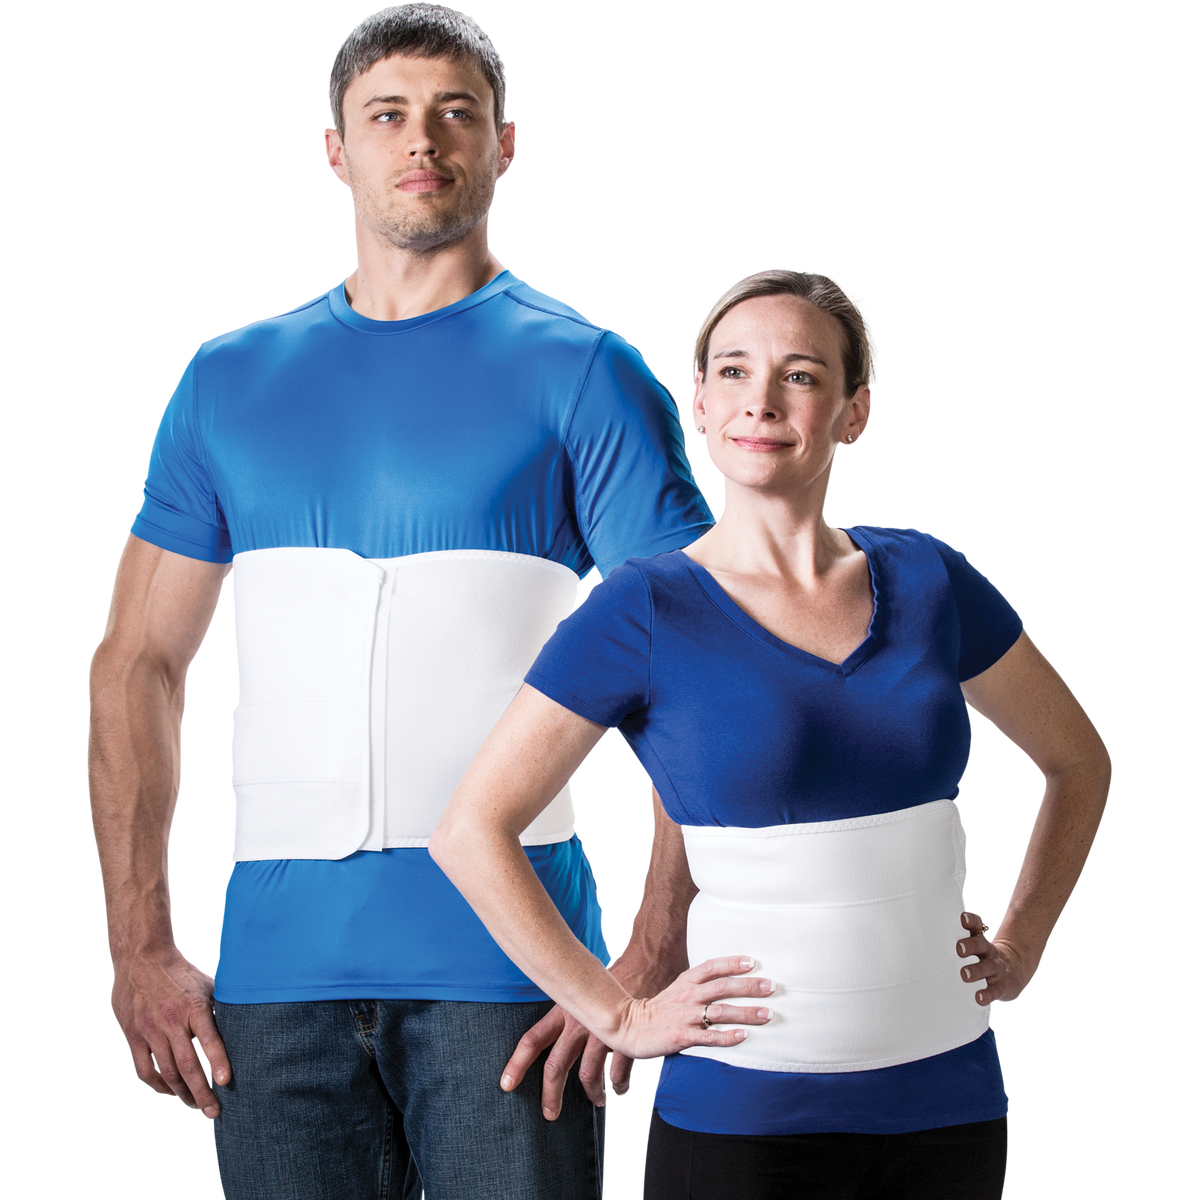 Post Abdominal Surgery Support Wrap, Best Compression Girdle for Tummy  Tuck, Hysterectomy or Any Post Surgical Procedures. Shapewear 